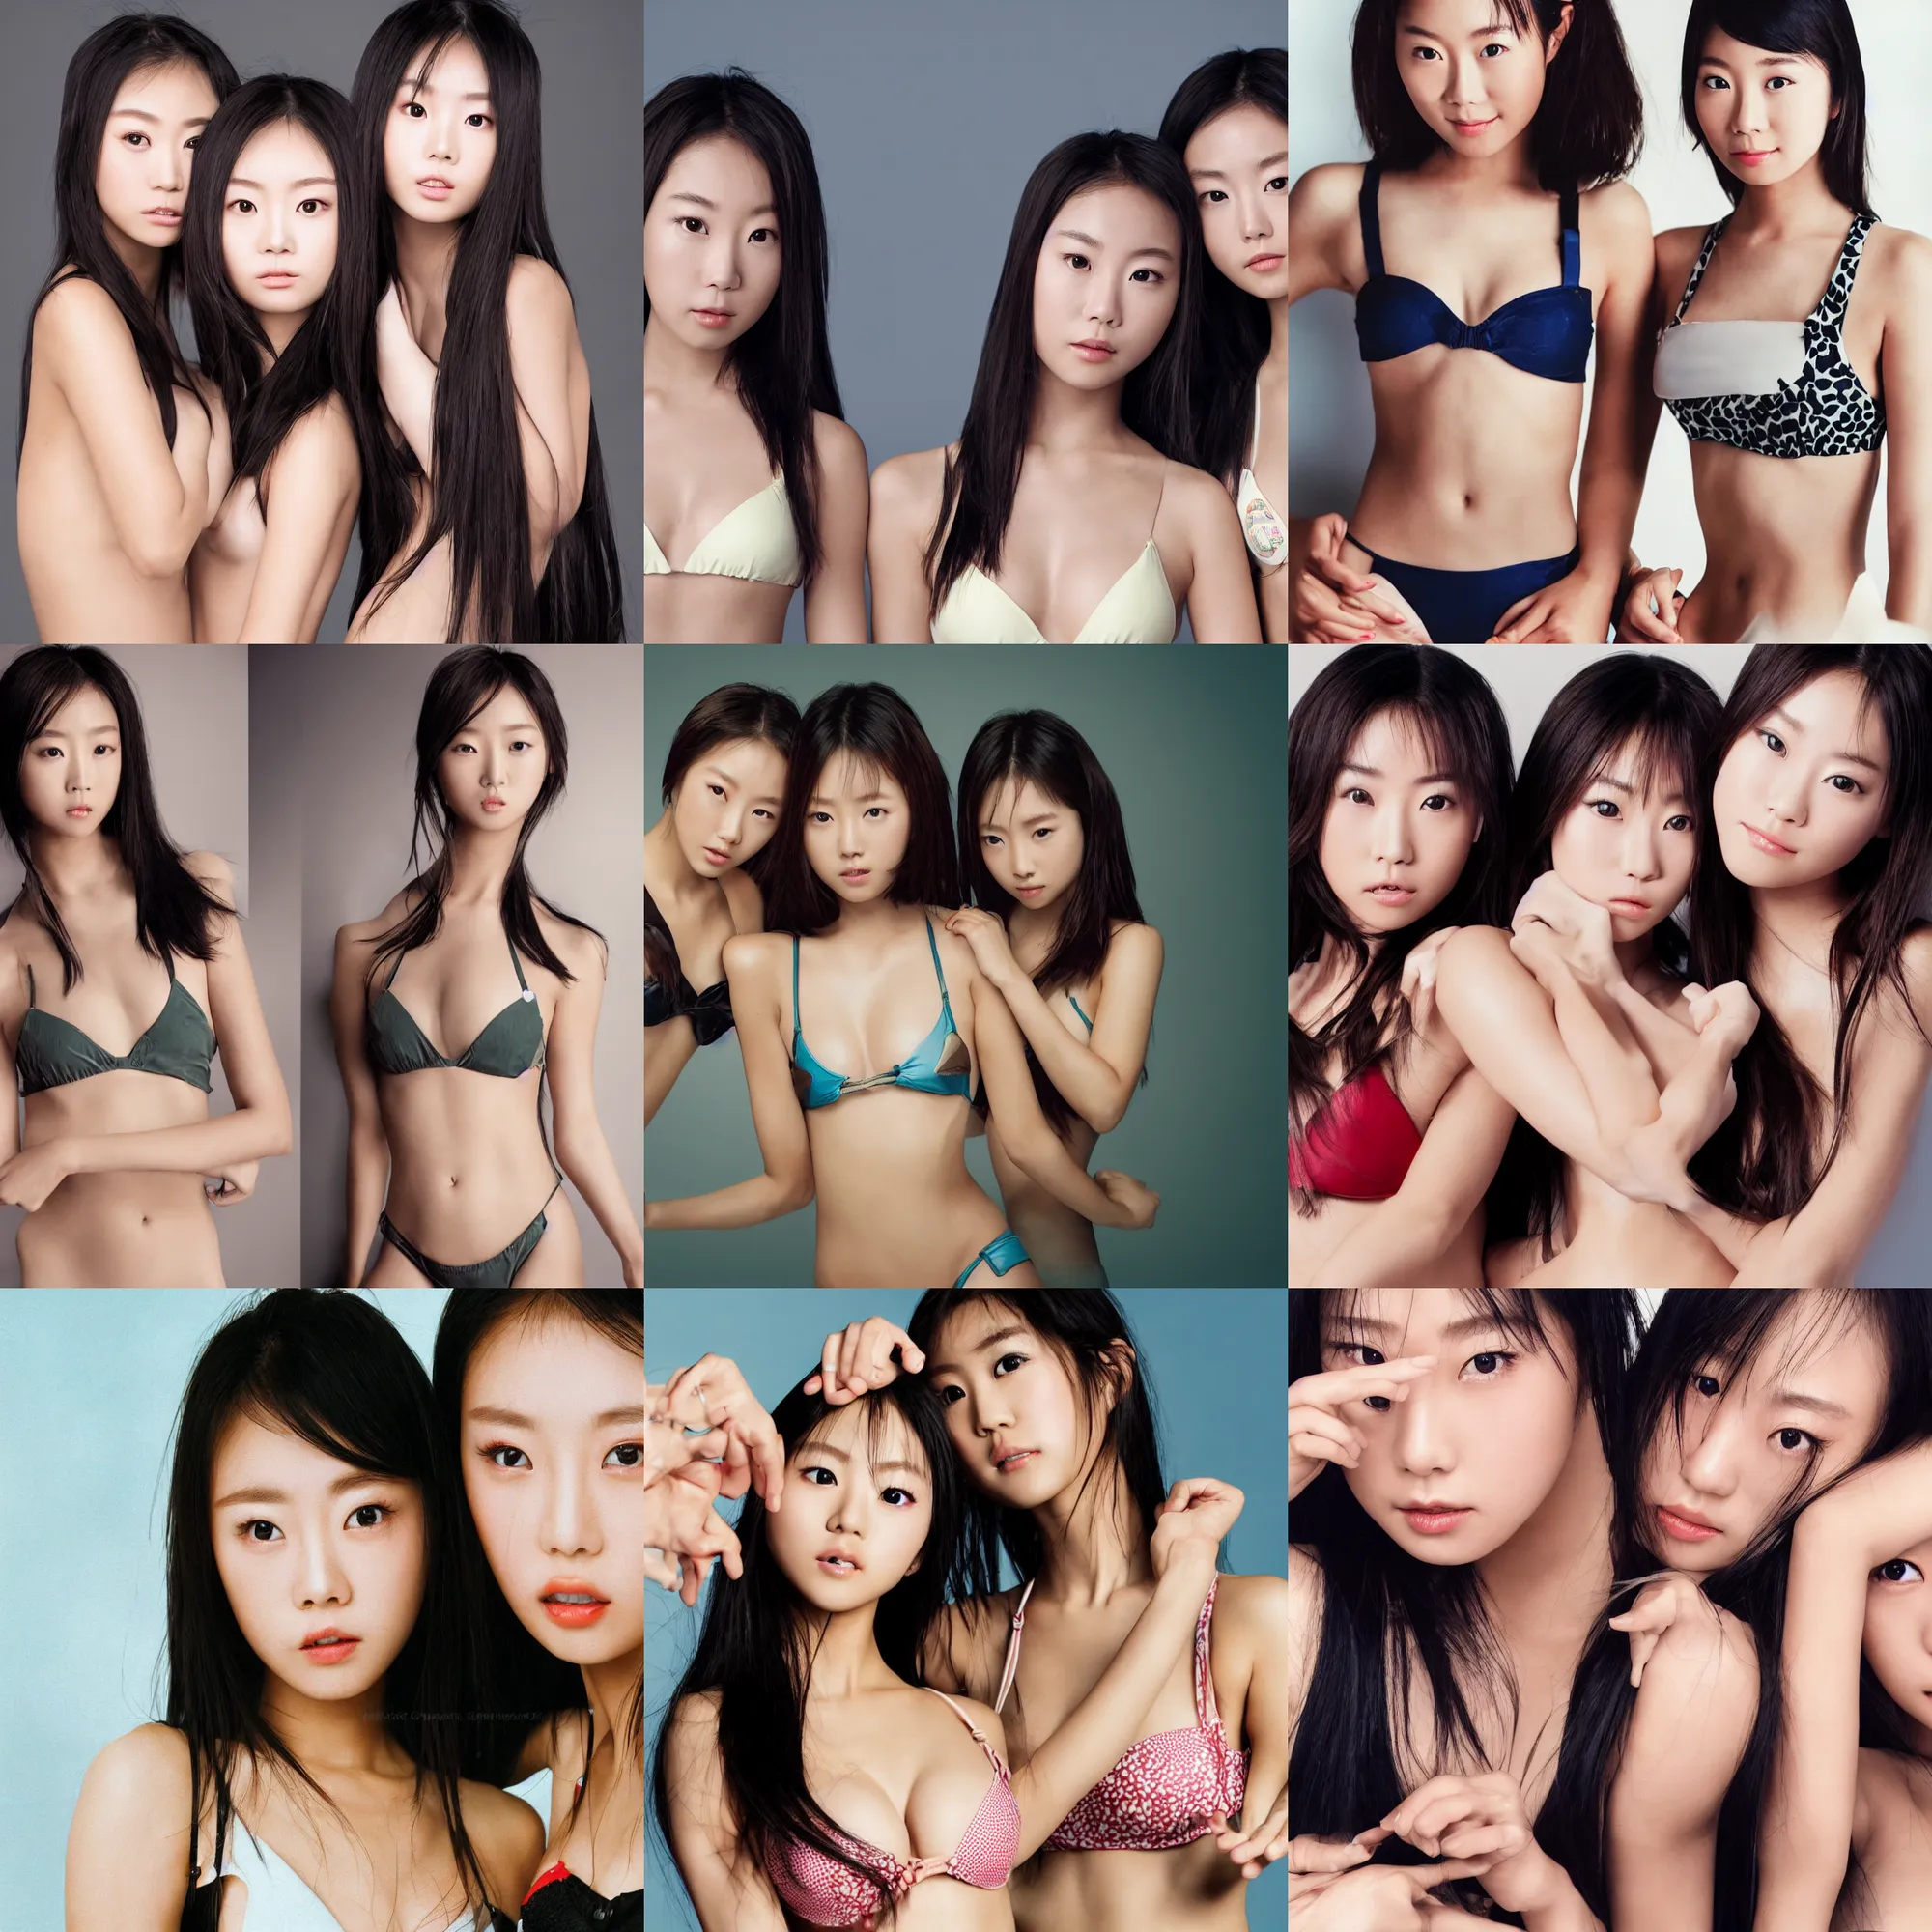 Prompt: Worksafe.2000s,8K HD incredible professional studio photo very close-up face of two young beautiful gorgeous cute Japanese actress supermodel J-Pop idol girls posing,wearing bikini bra.At Behance and Instagram,taken with polaroid kodak portra.Photoshop,Adobe Lightroom,After Effects